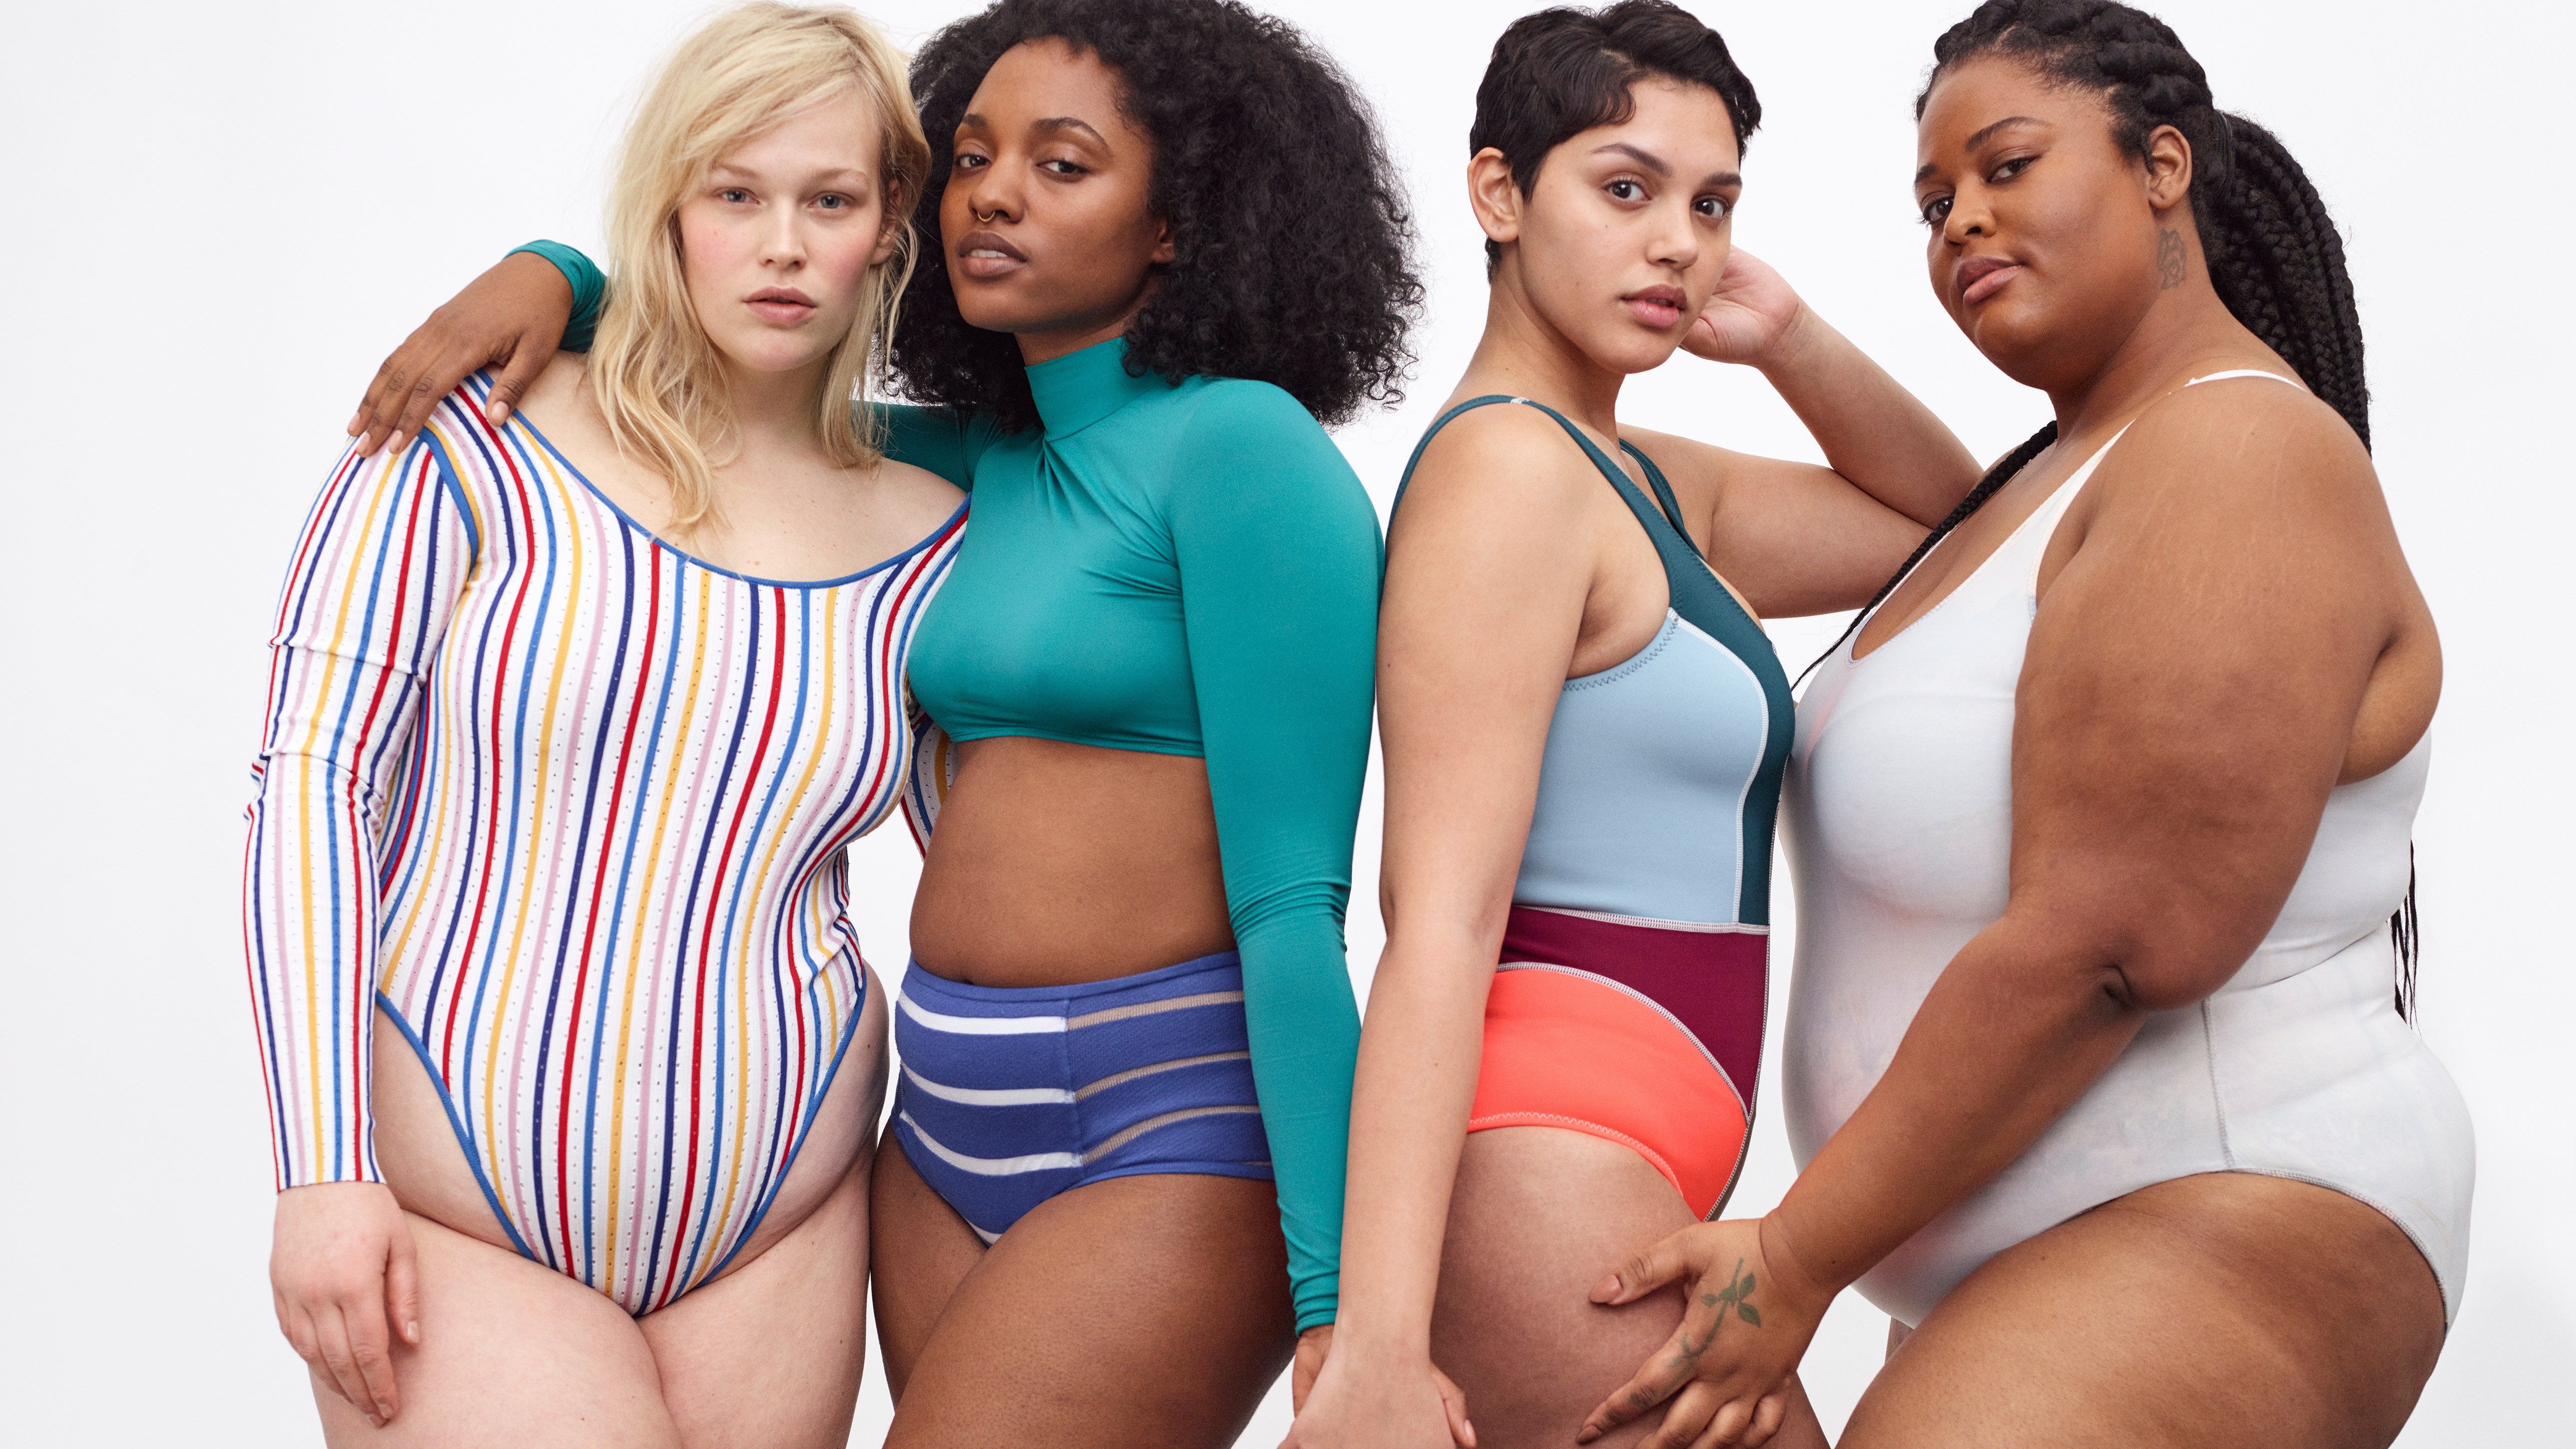 Six Women Pose for Beautiful Photo of Their Cellulite